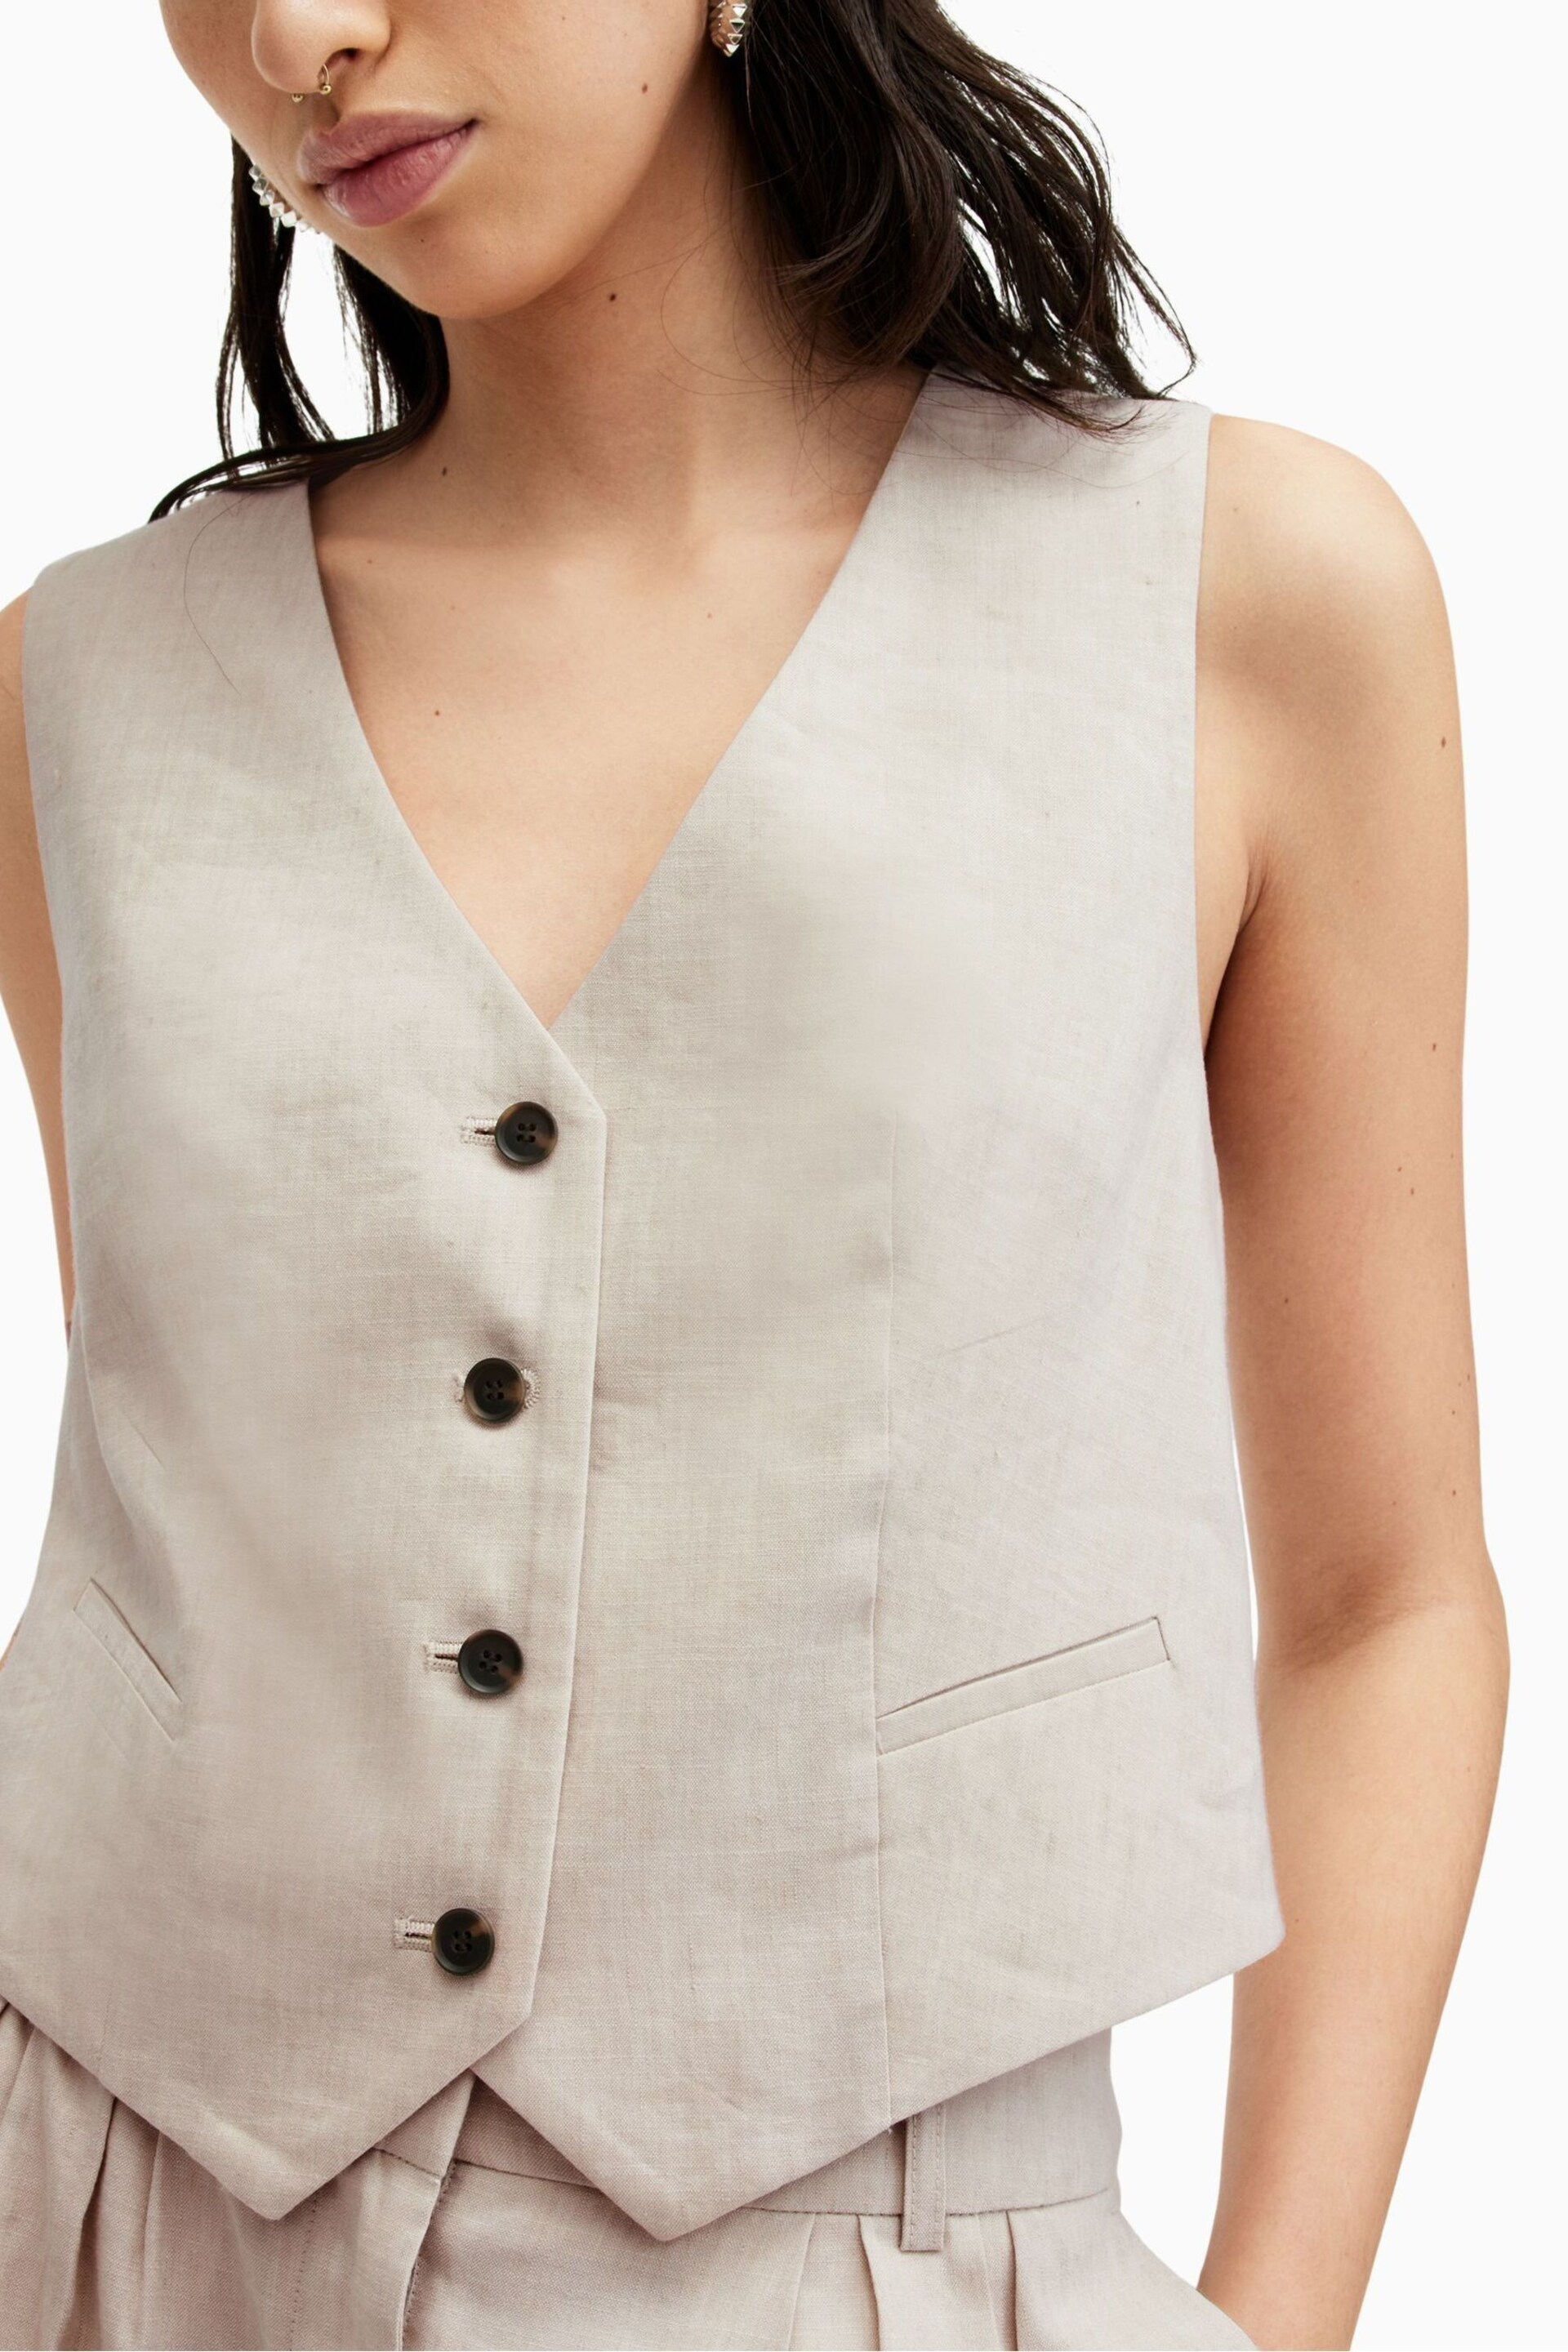 AllSaints Brown Whitney Waistcoat - Image 5 of 6